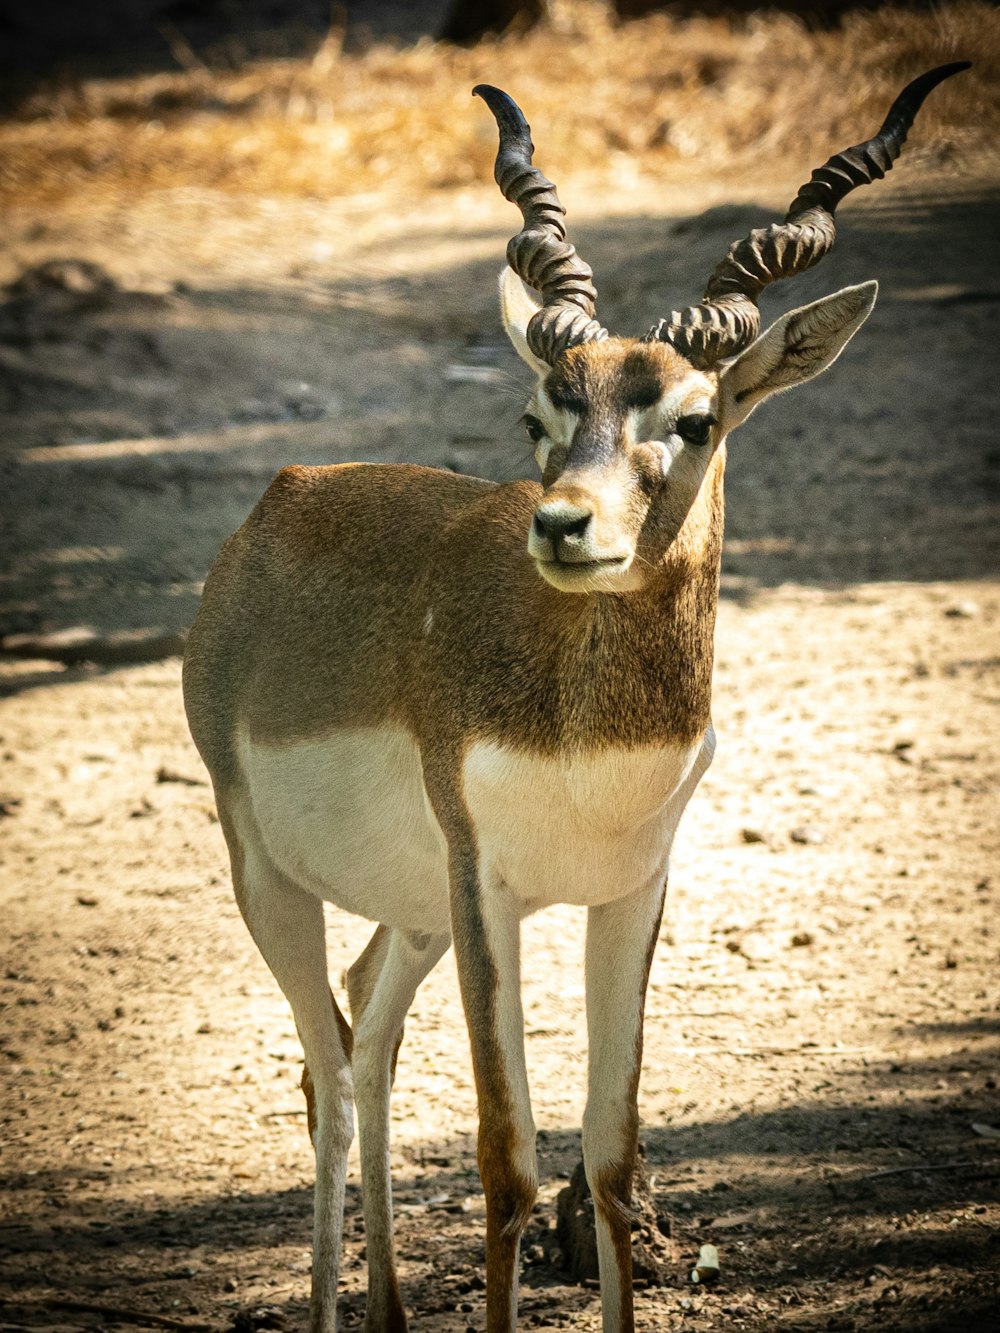 a small antelope standing on a dirt road